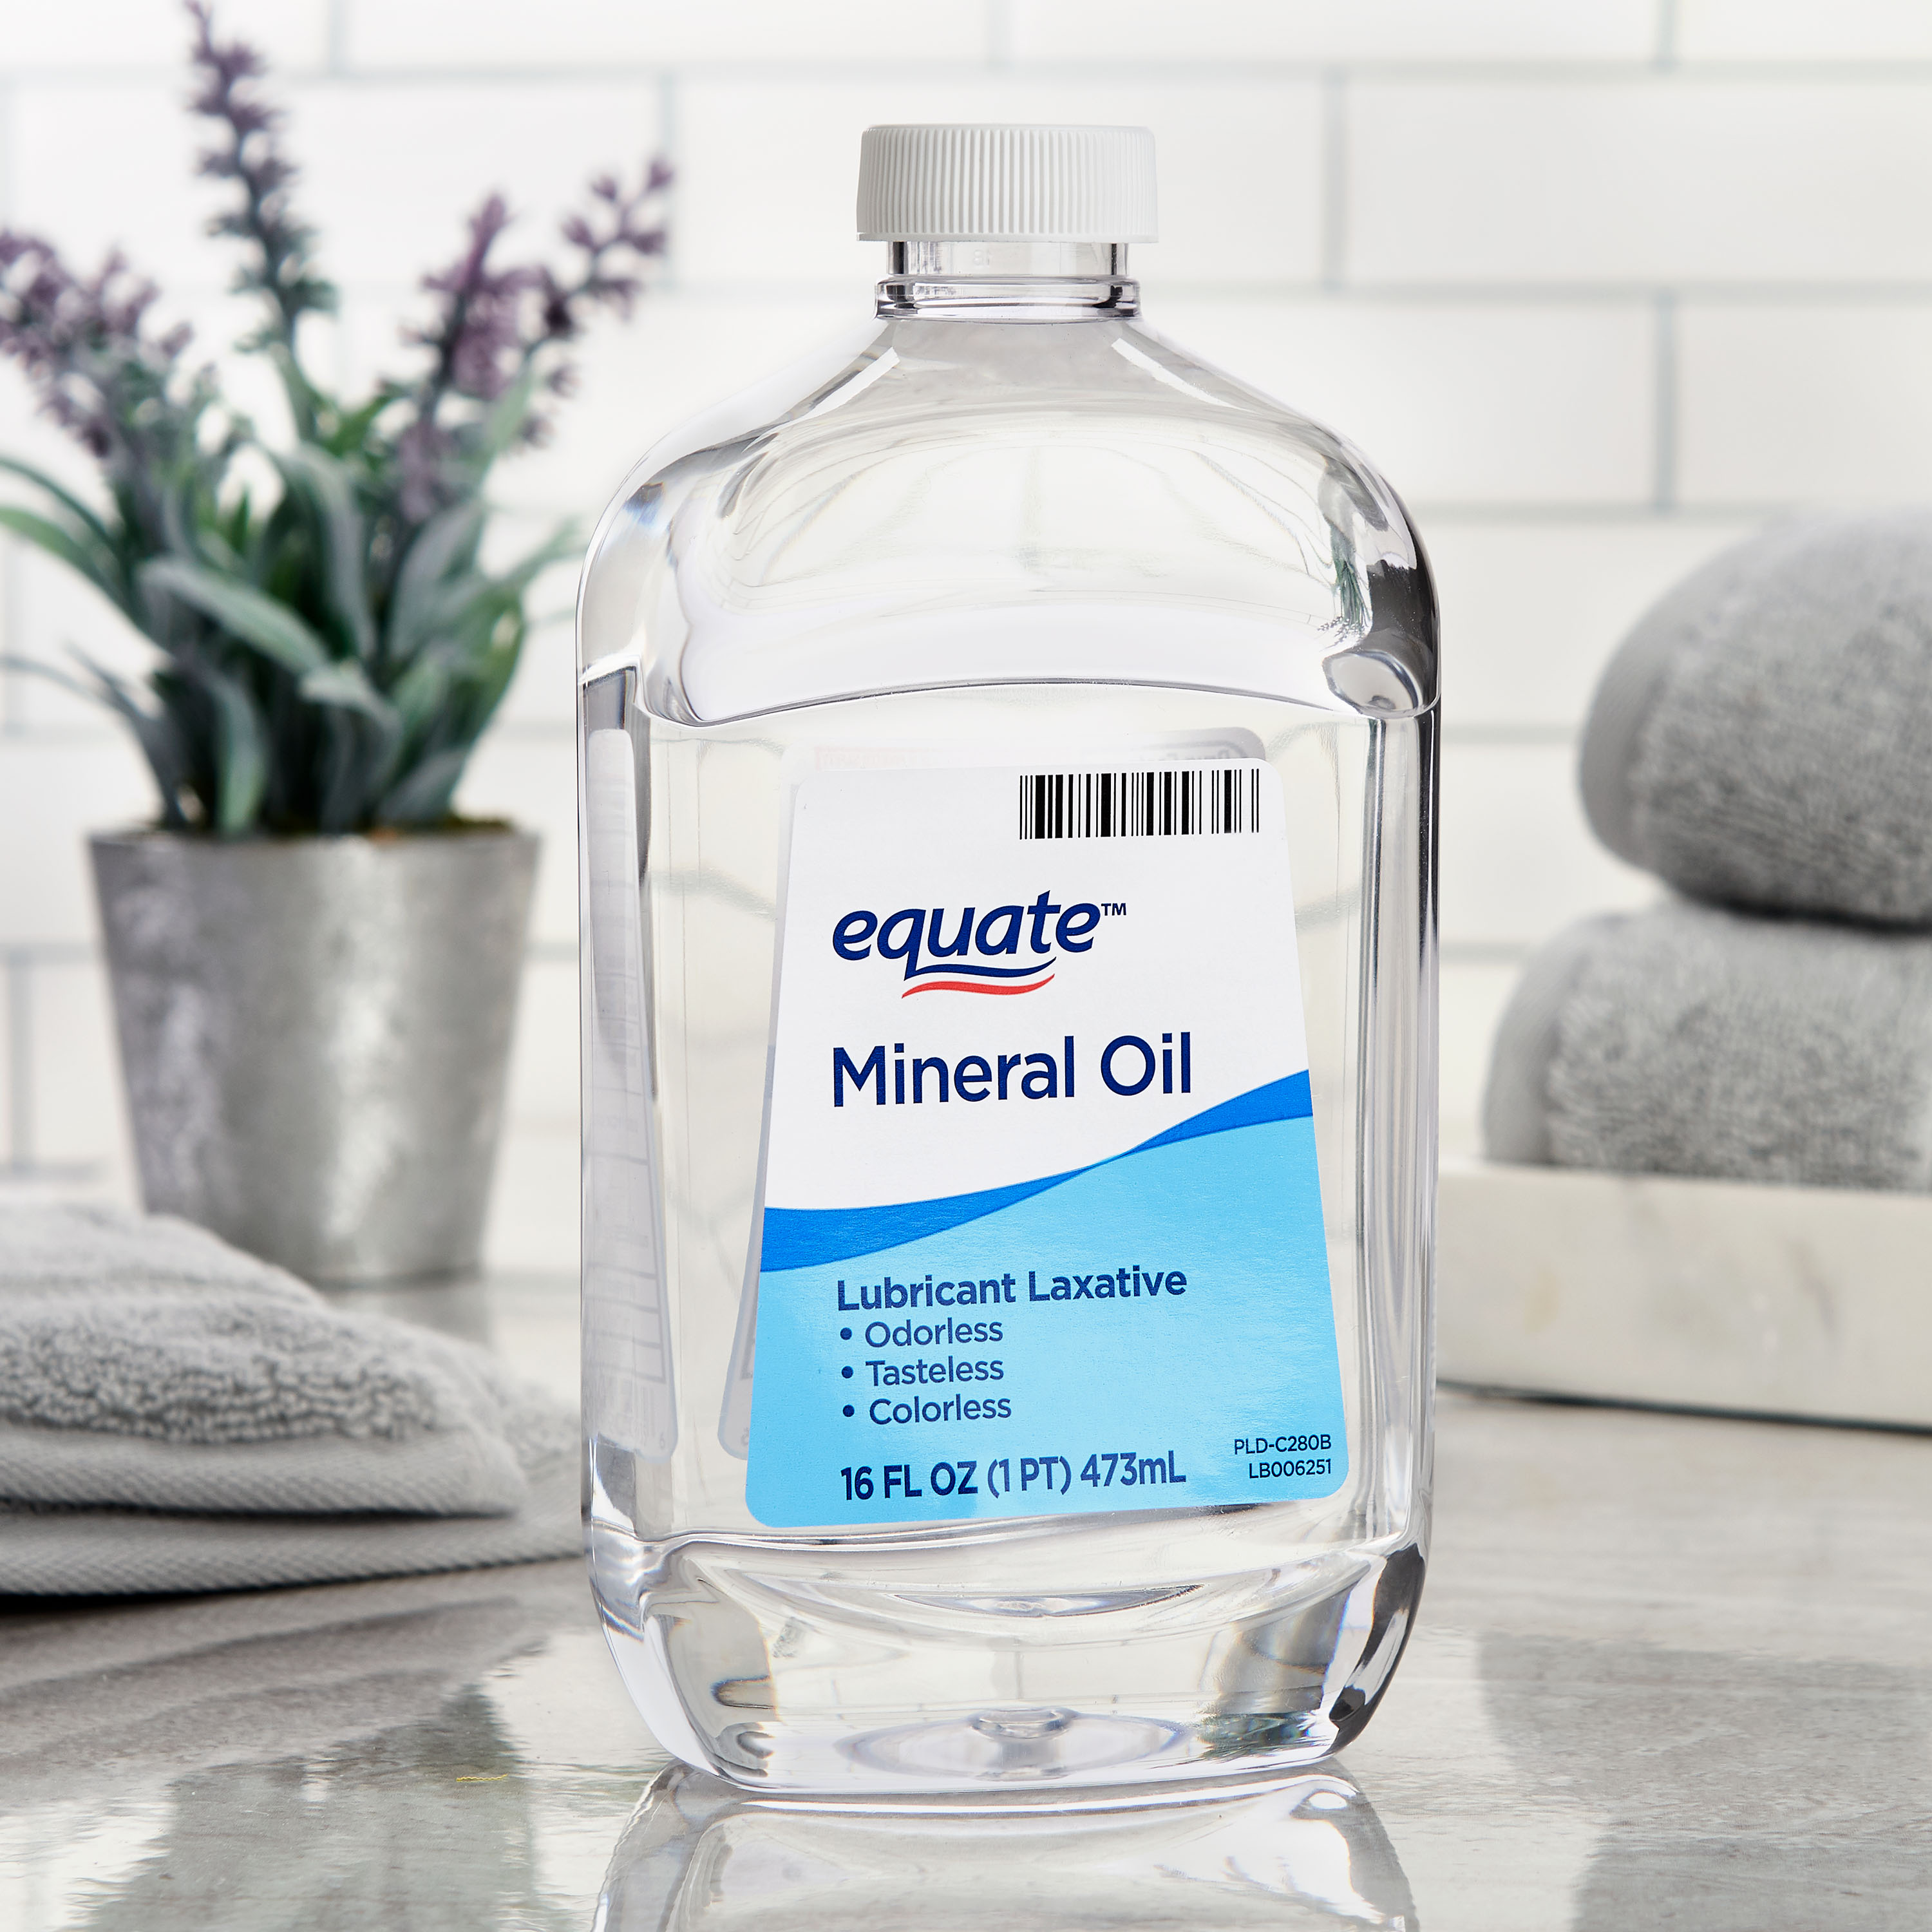 Equate Mineral Oil Lubricant Laxative Liquid for Constipation, 16 fl oz (474mL) - image 2 of 9